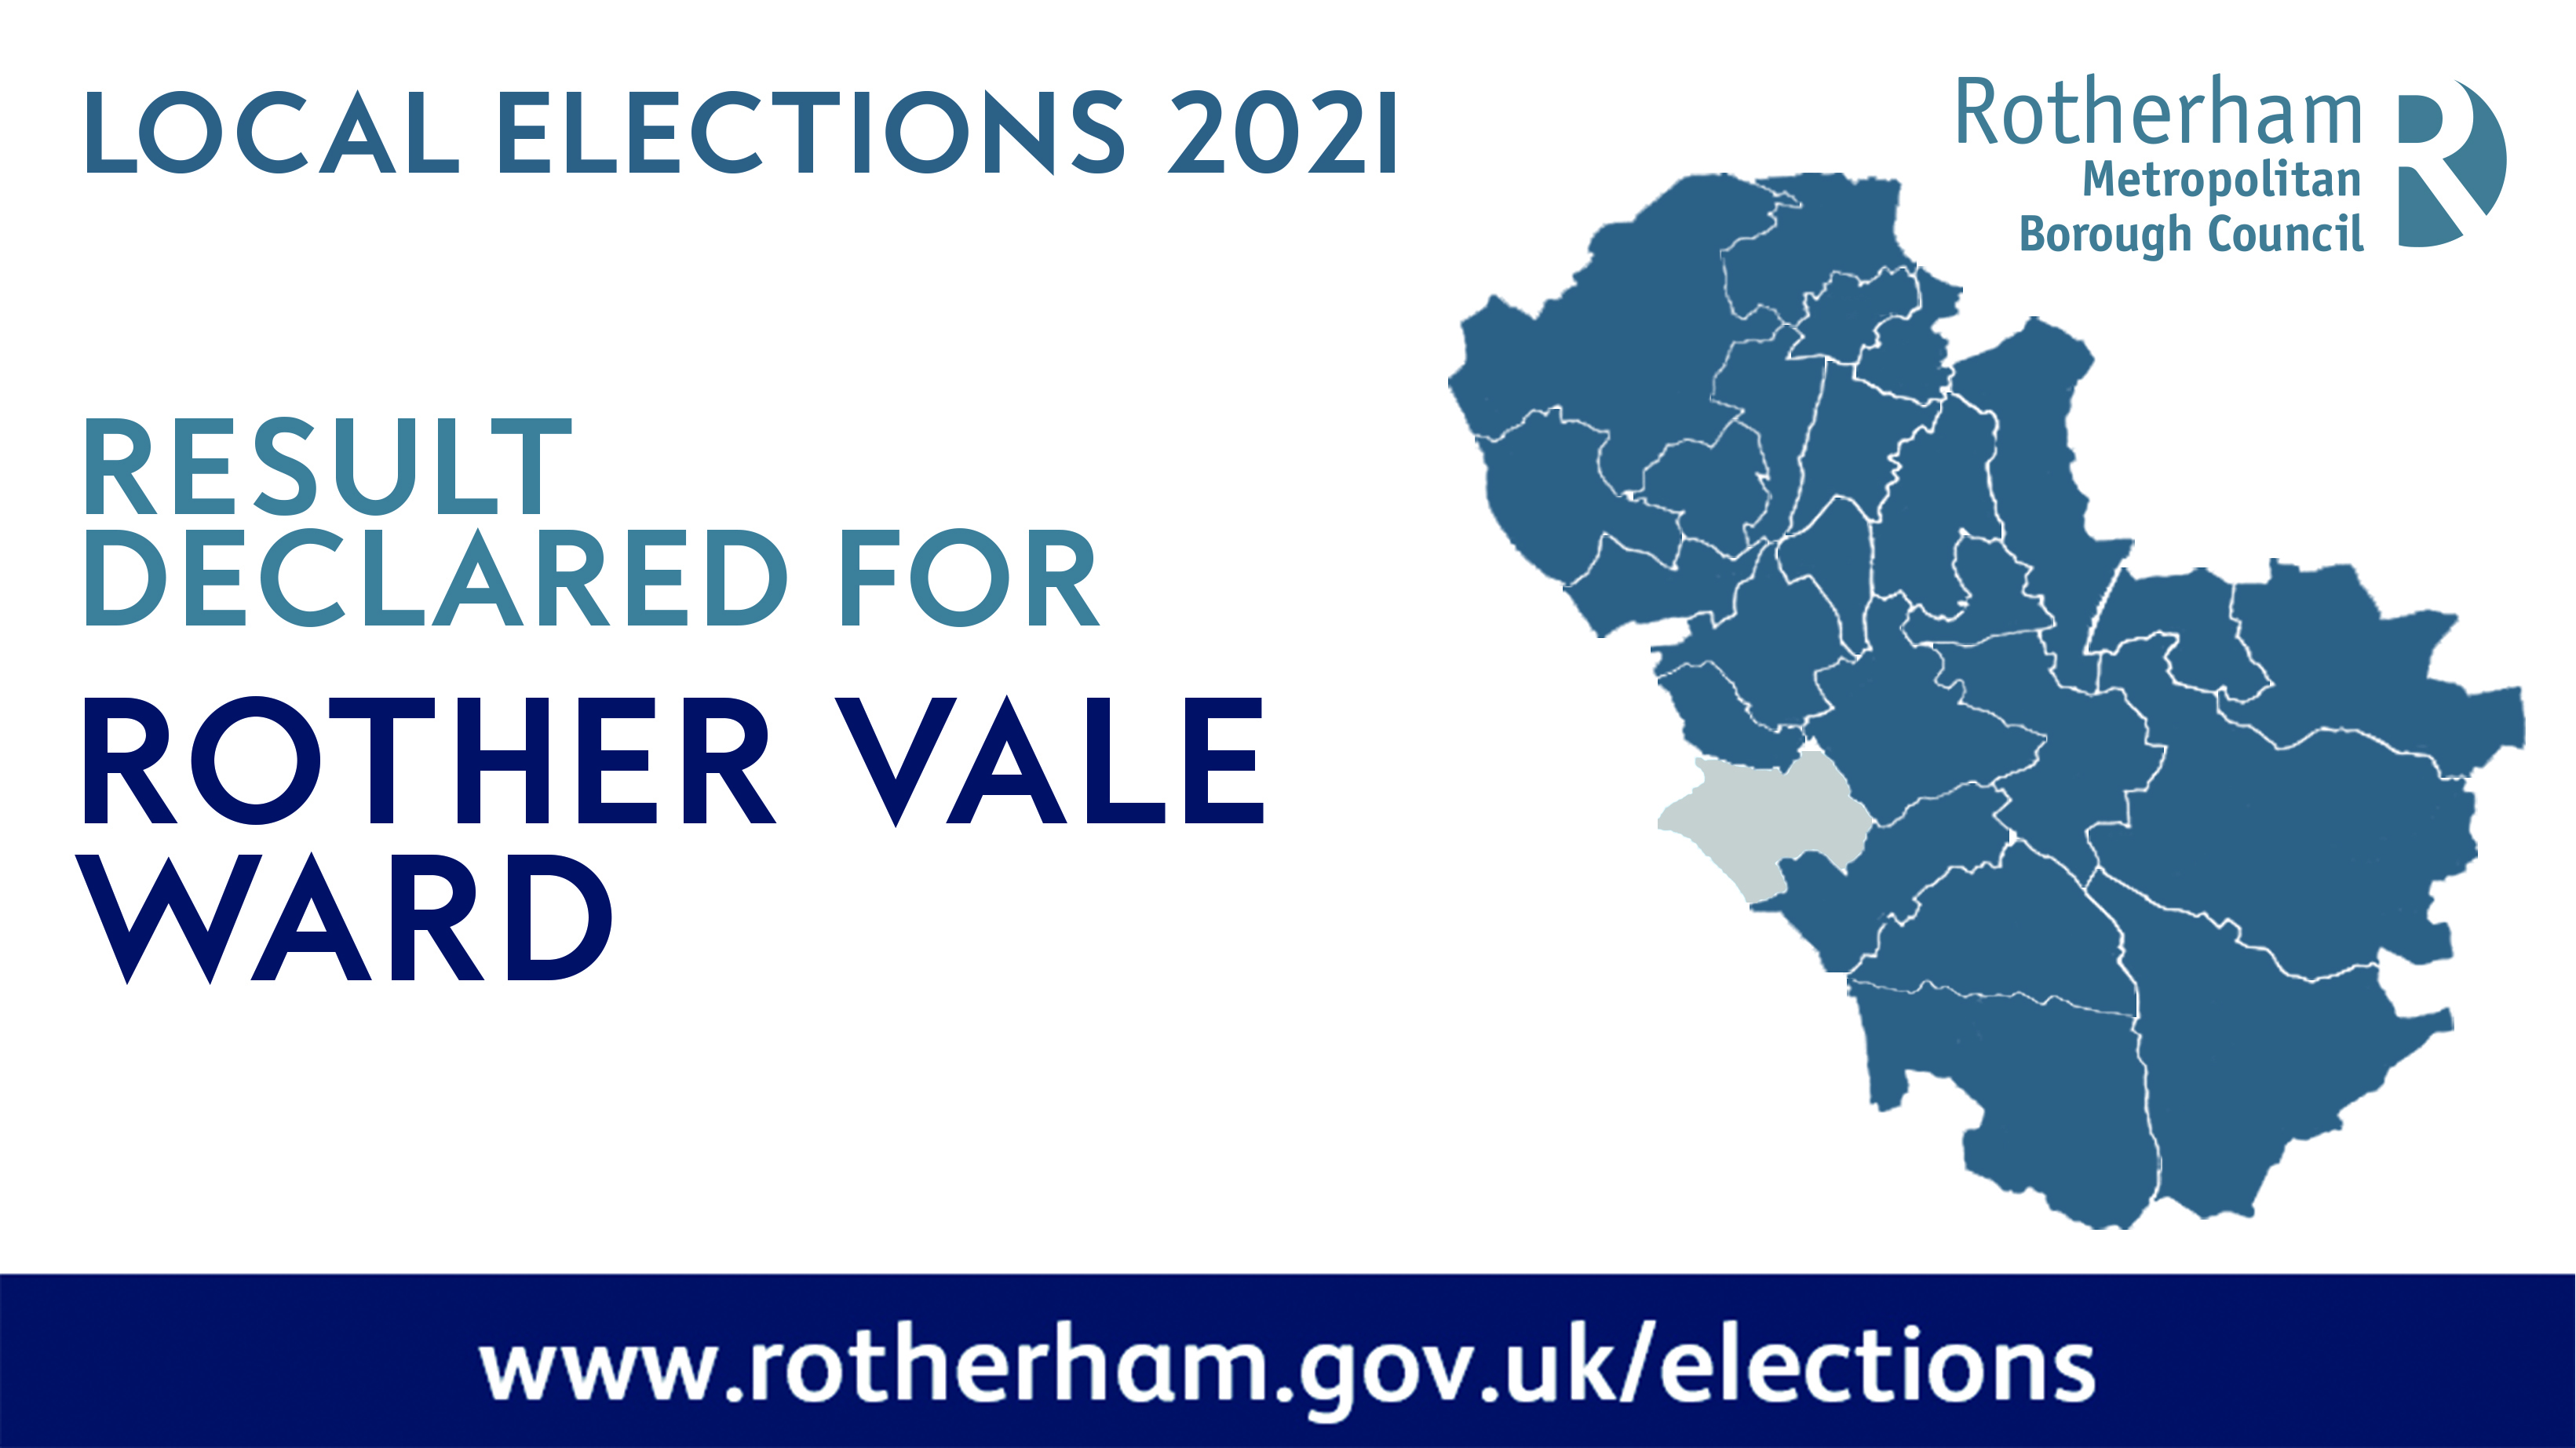 Rother Vale ward result declared